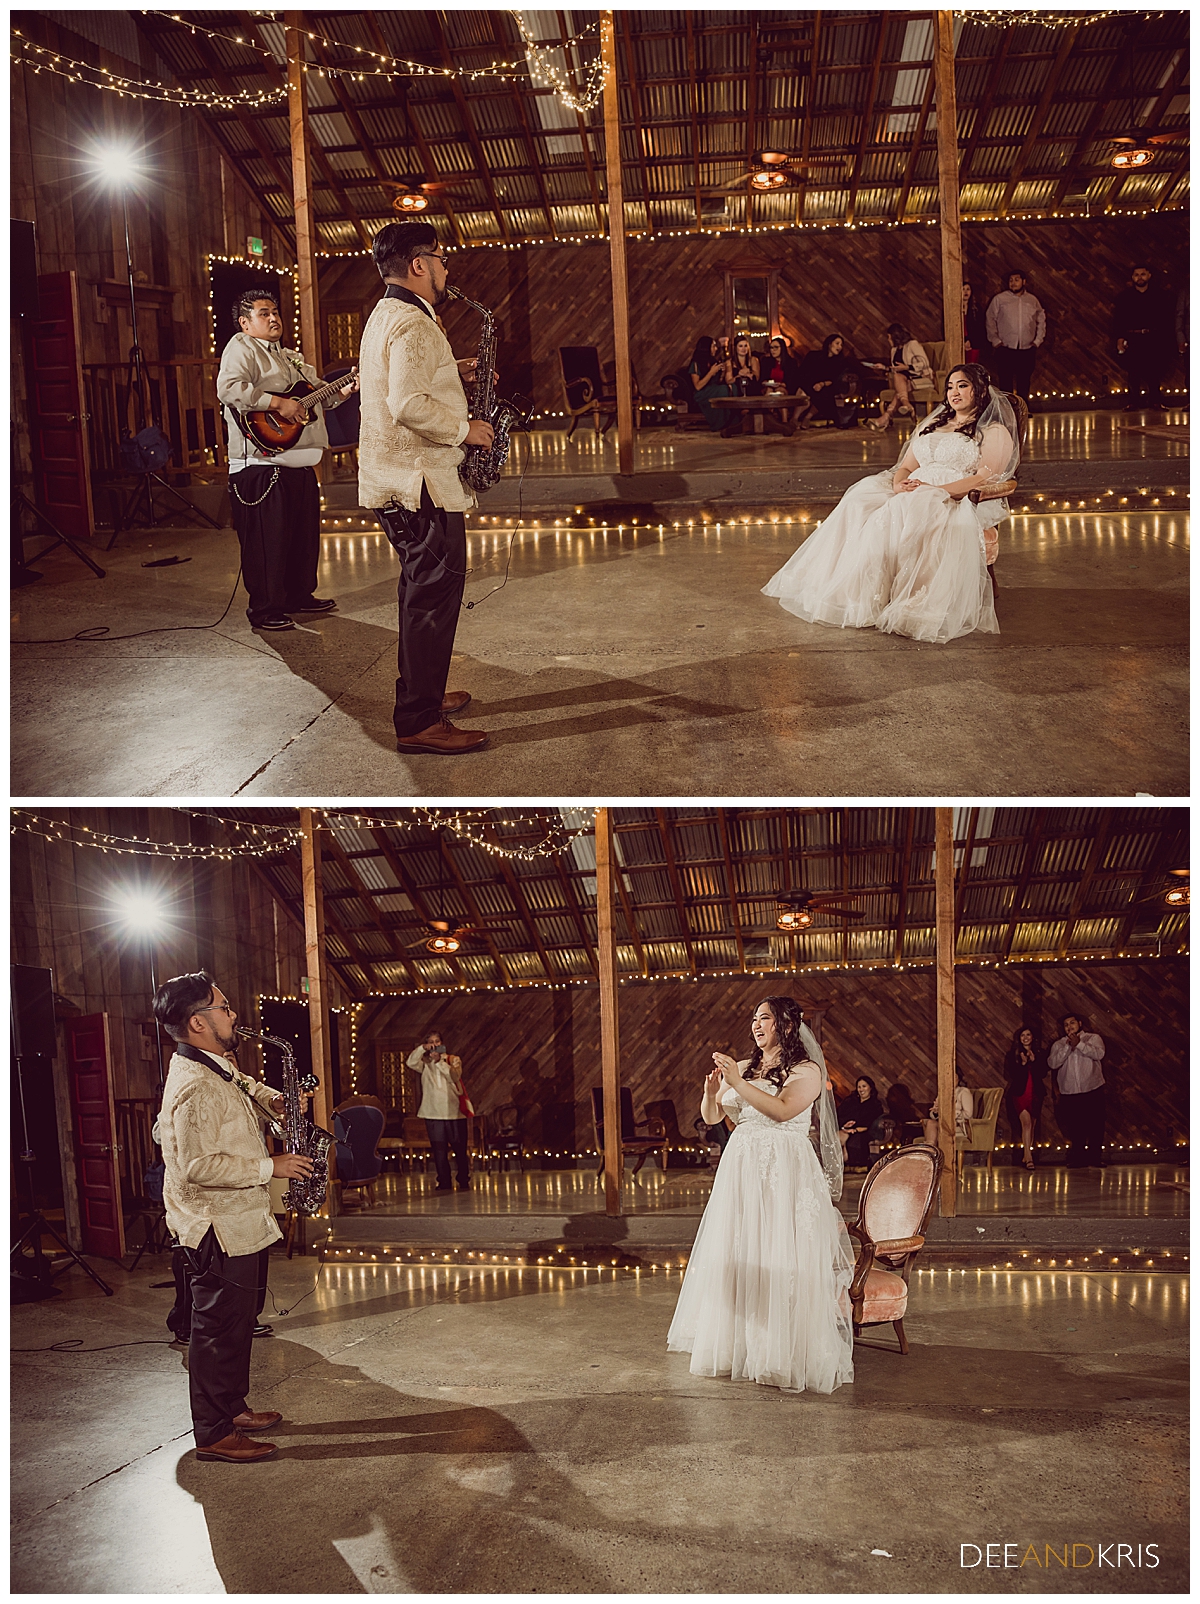 Two images of groom playing saxophone for his bride.